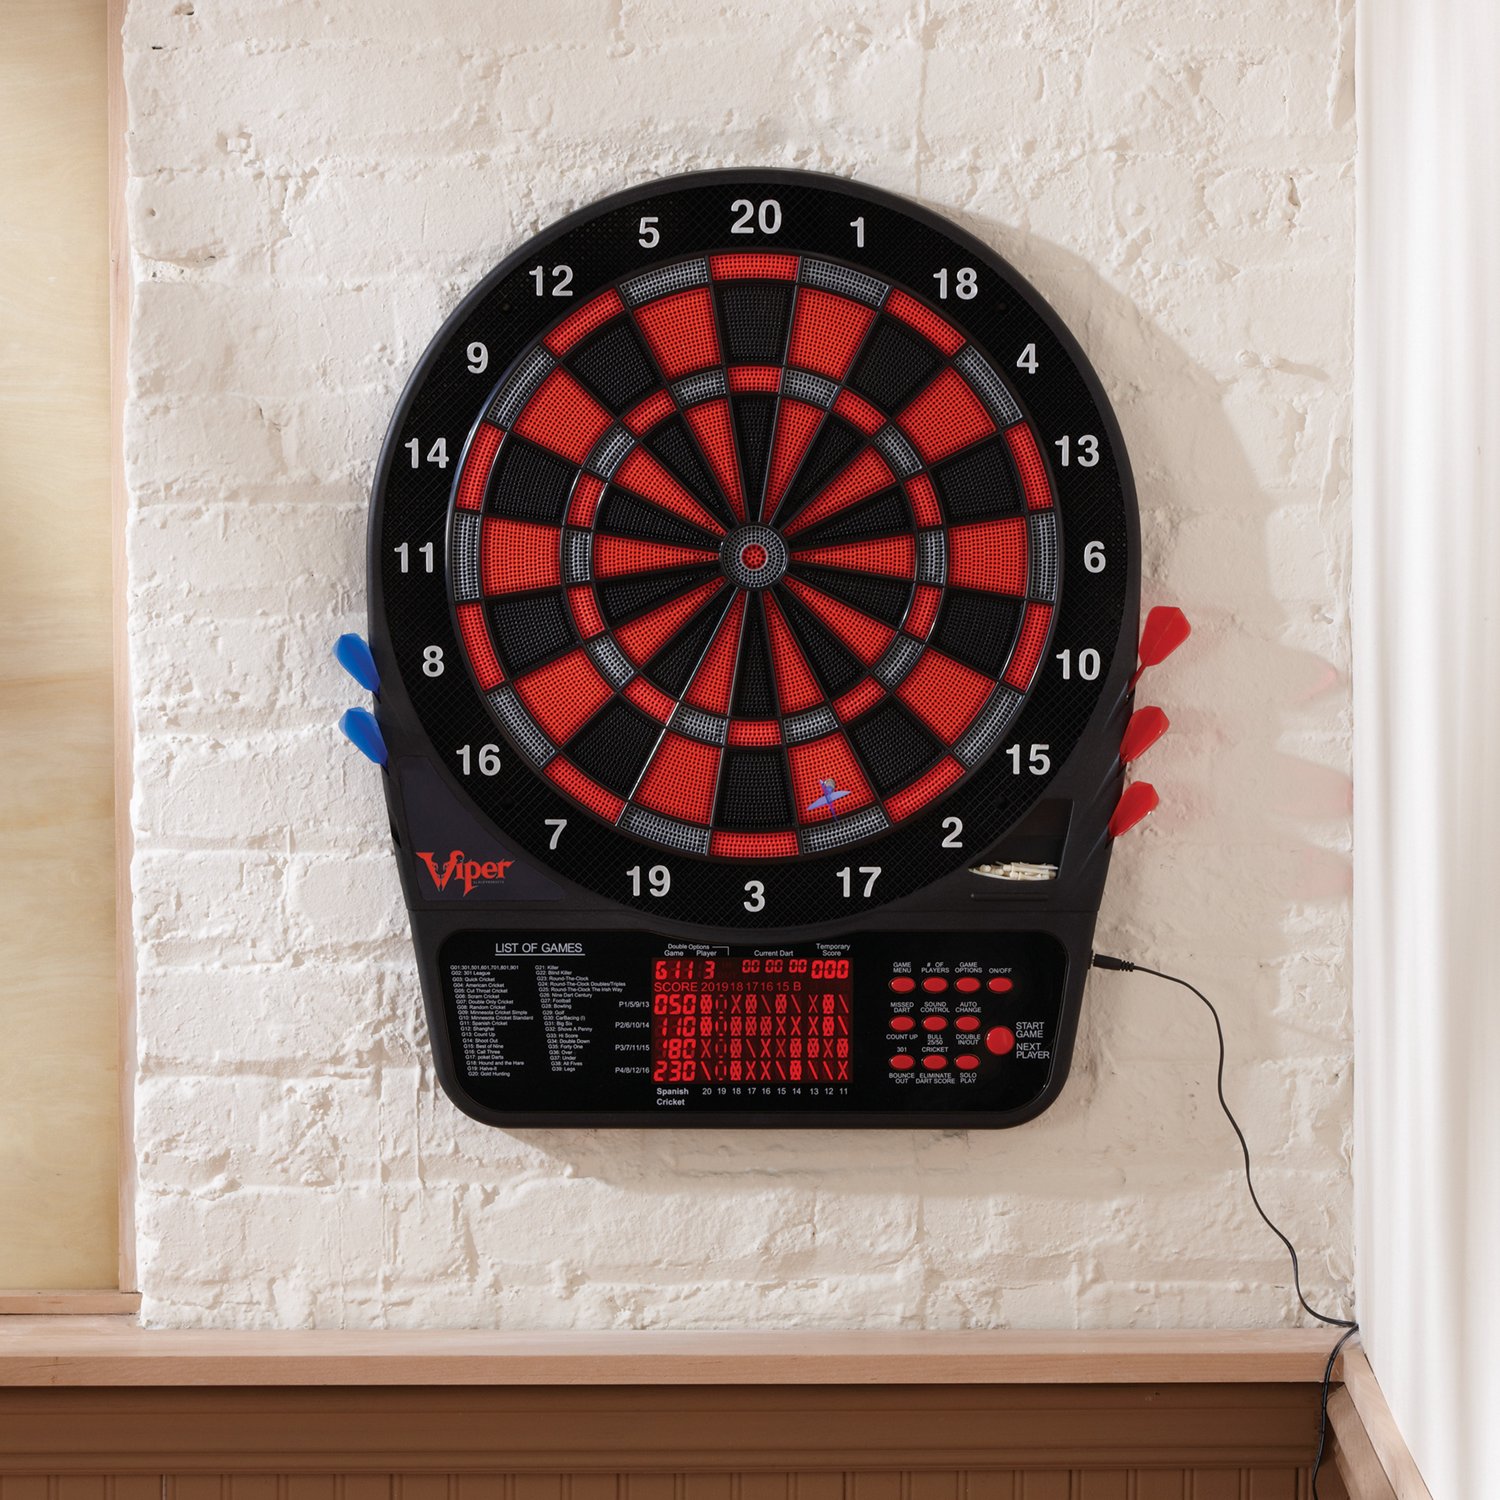 Viper 800 Electronic Dartboard | Free Shipping at Academy